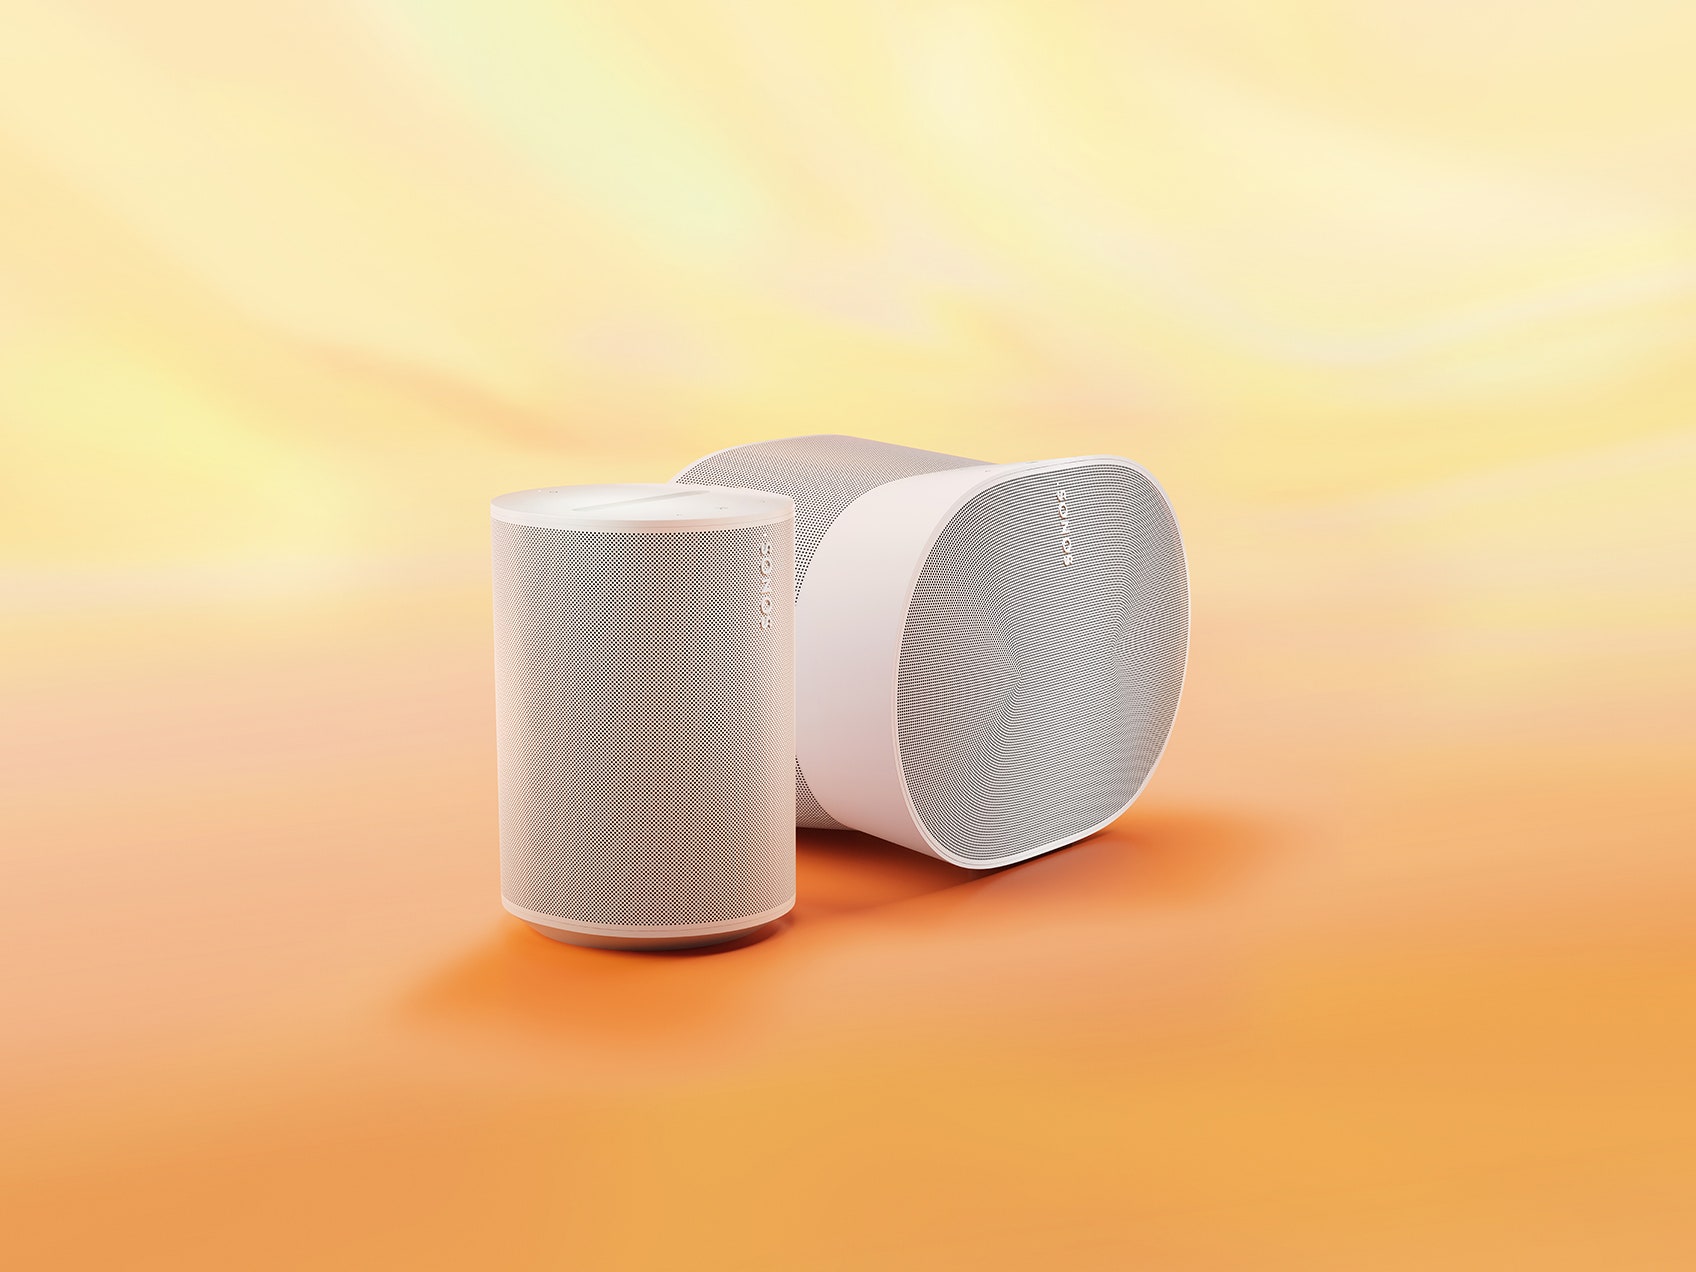 sonos-launches-2-speakers-to-kick-off-a-new-era